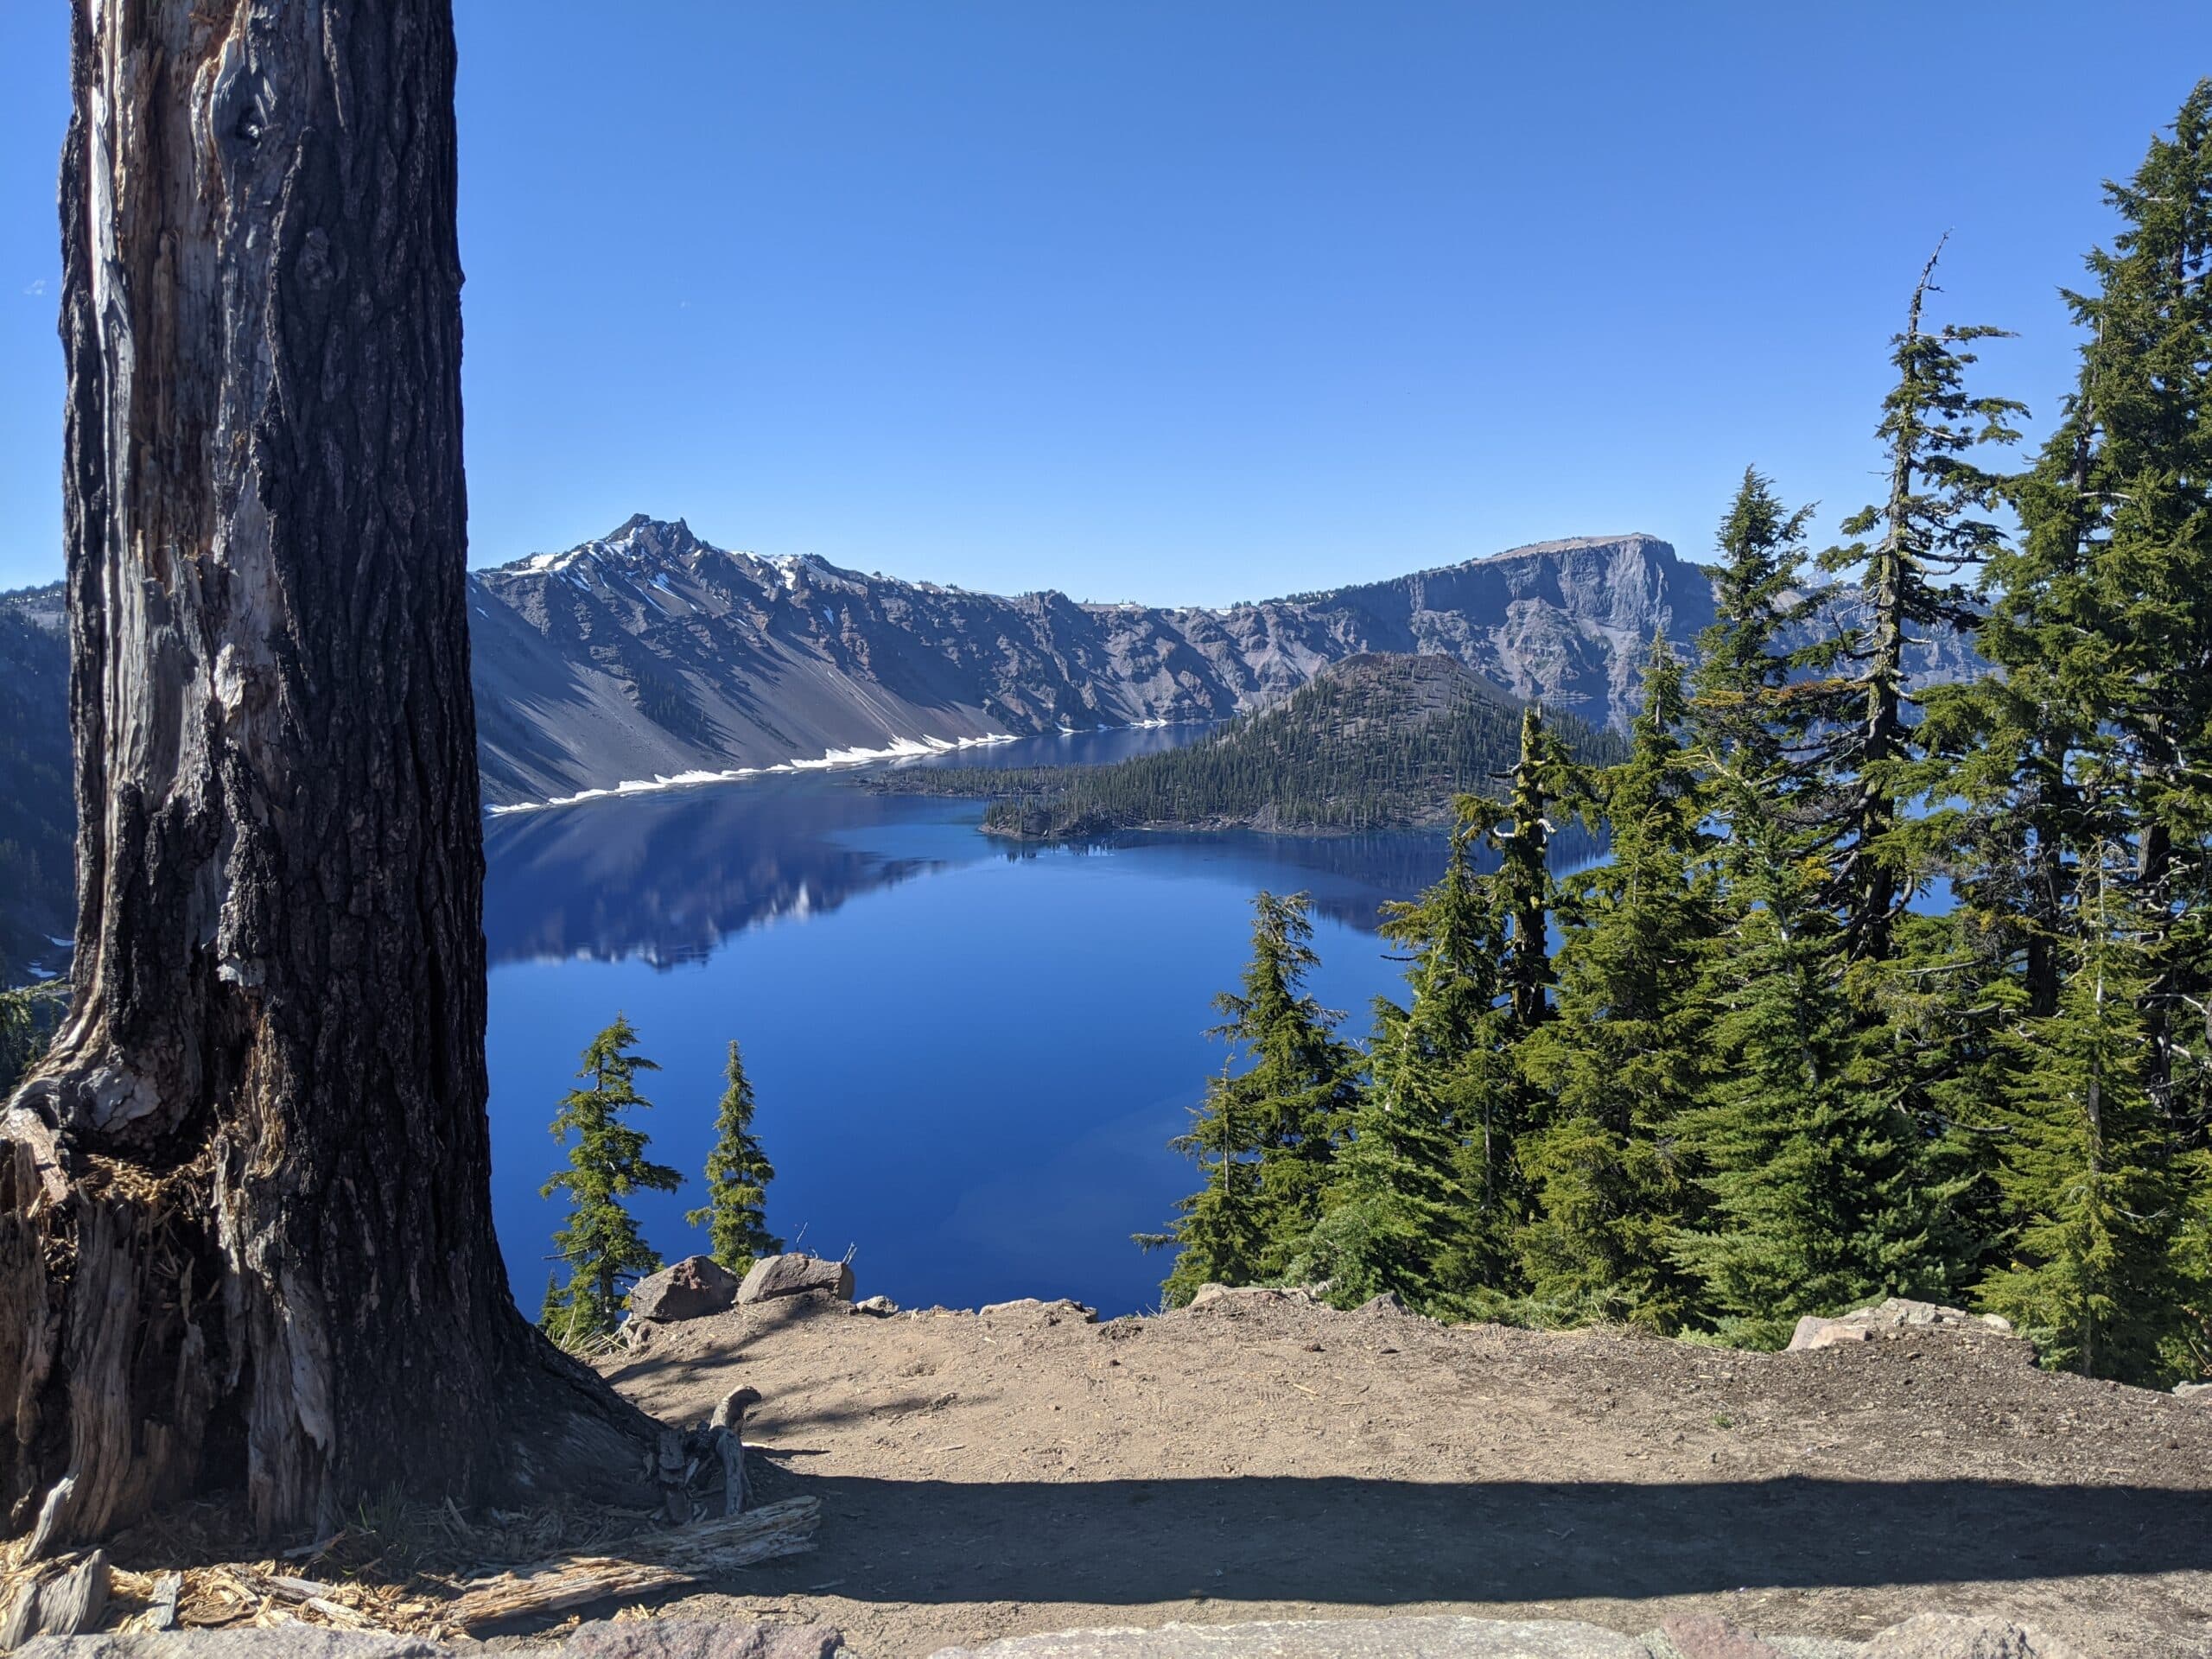 Crater Lake rim trail viewpoint